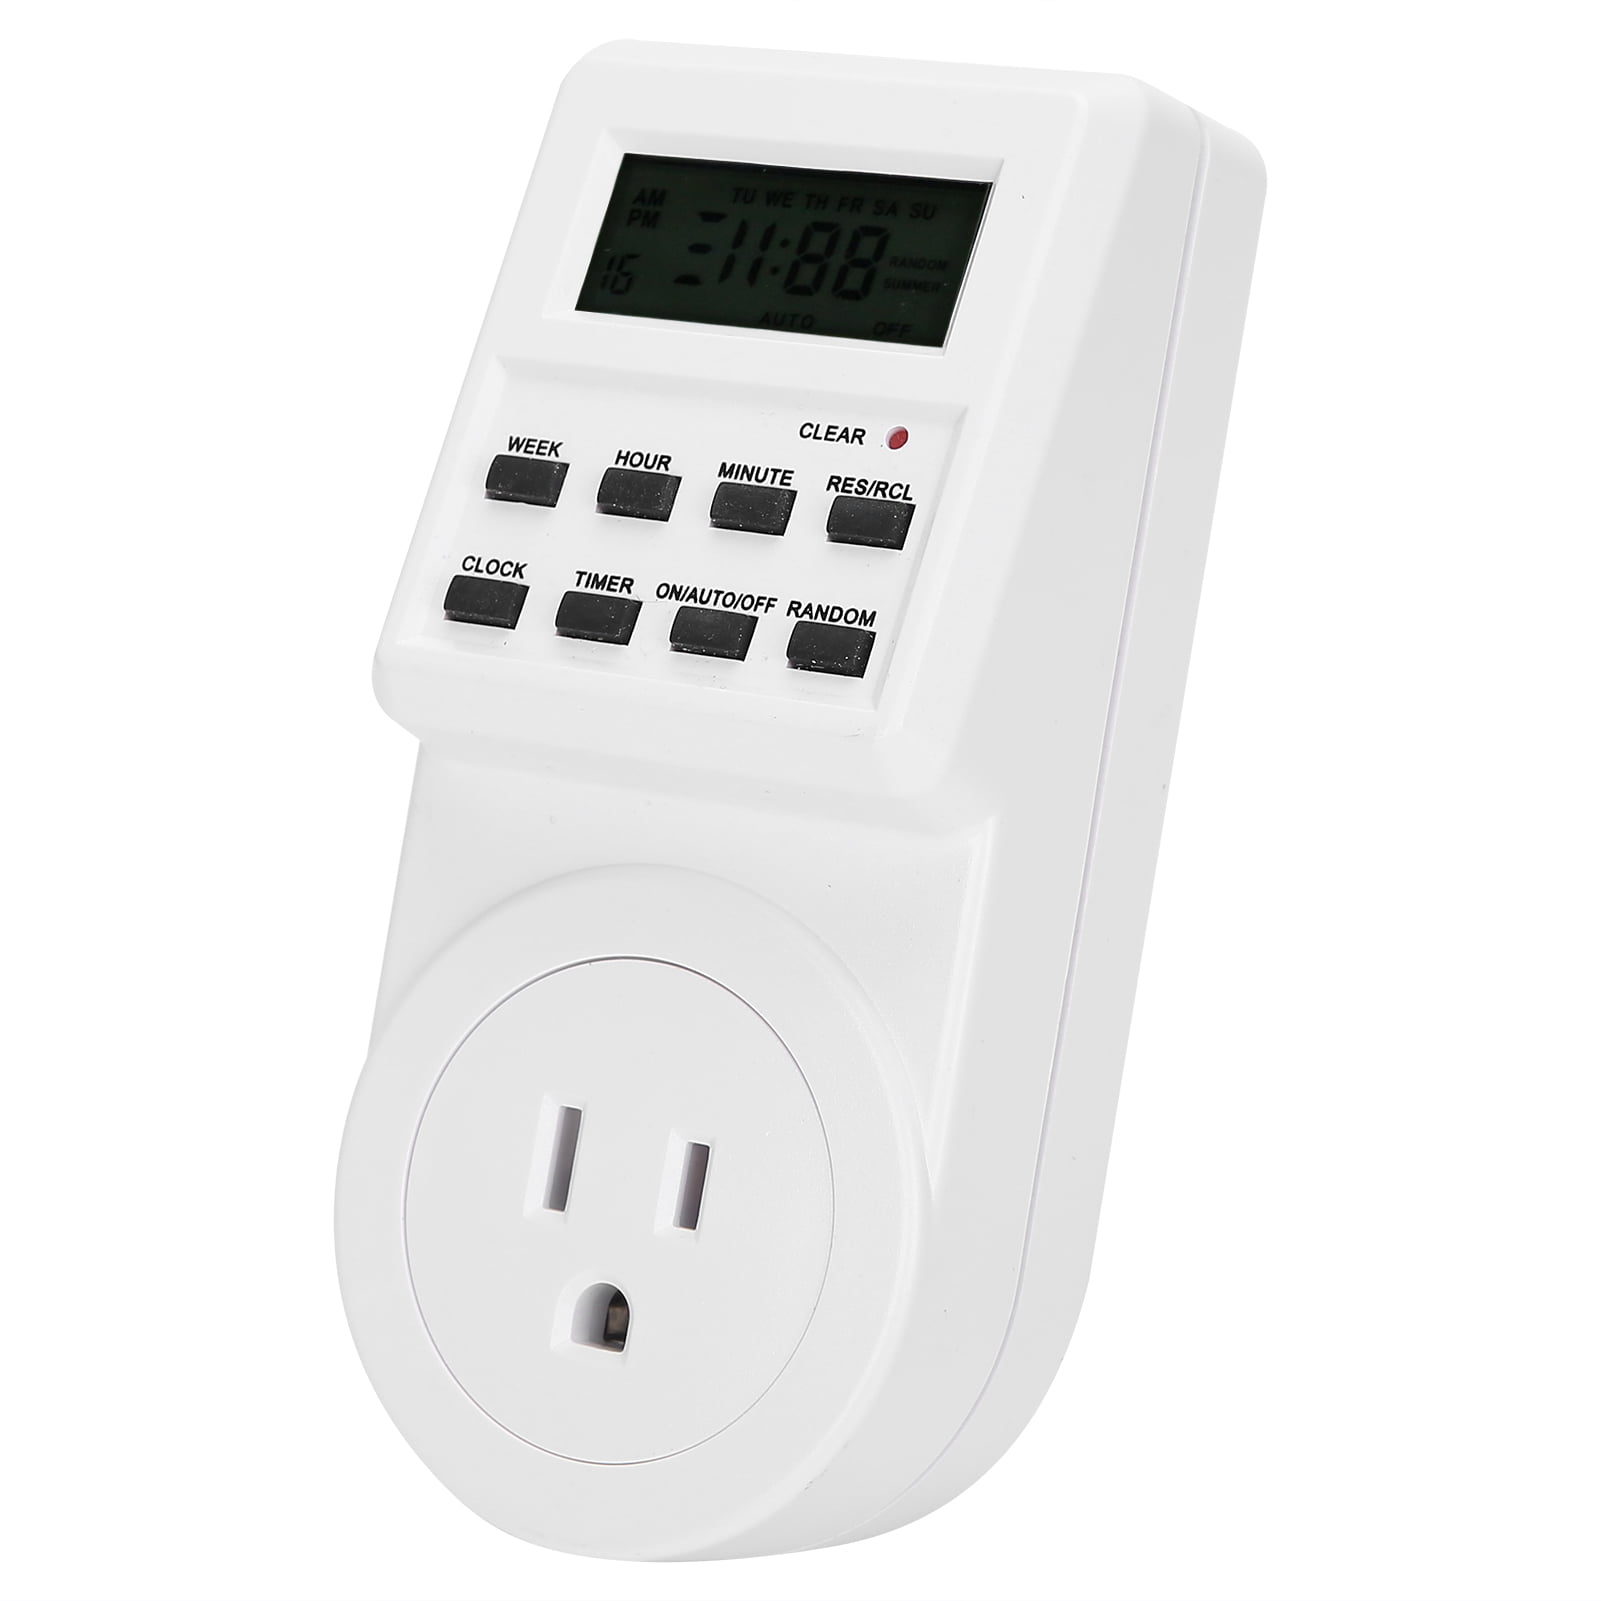 Timer Switch, Power Switch Socket, Intelligent Programmable Light Timer Socket For Lamps Fans Kitchen Appliances Heaters Mobile Phone Chargers TS-T01-US Plug 110V - Walmart.com